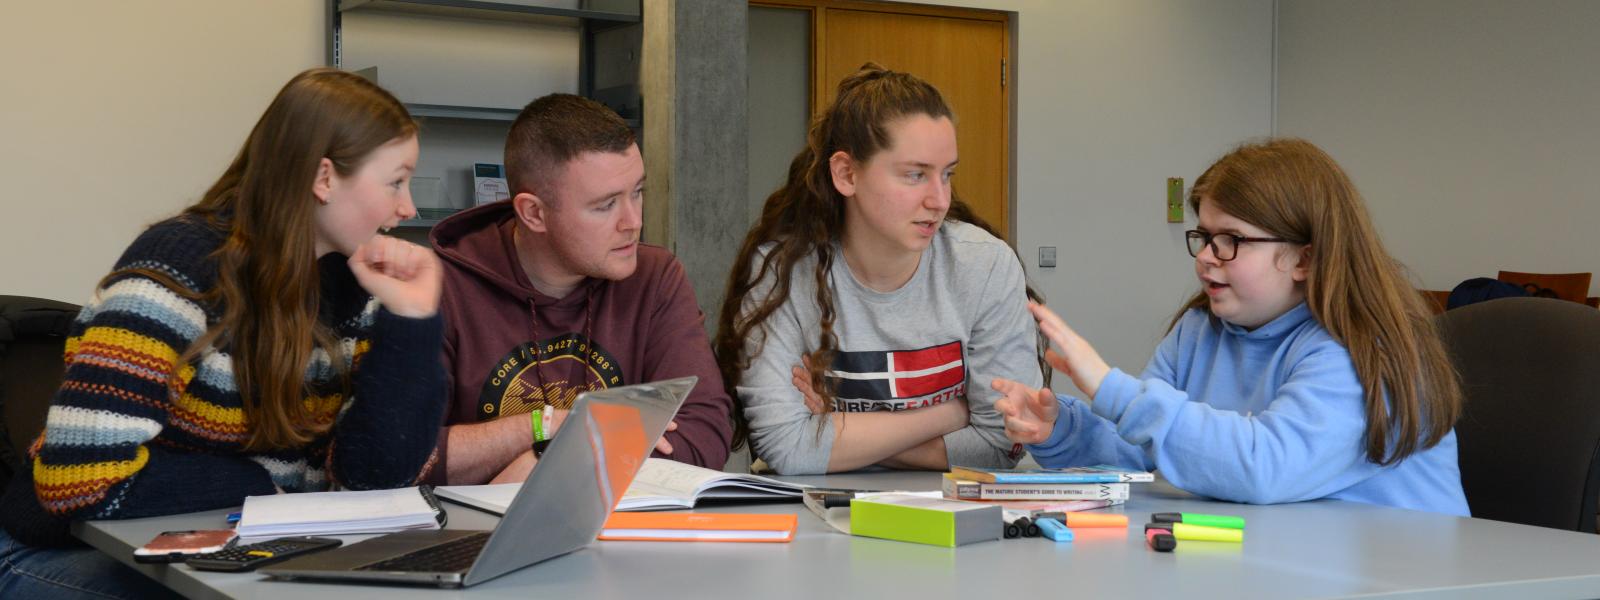 Four ATU Galway Students in Study Room